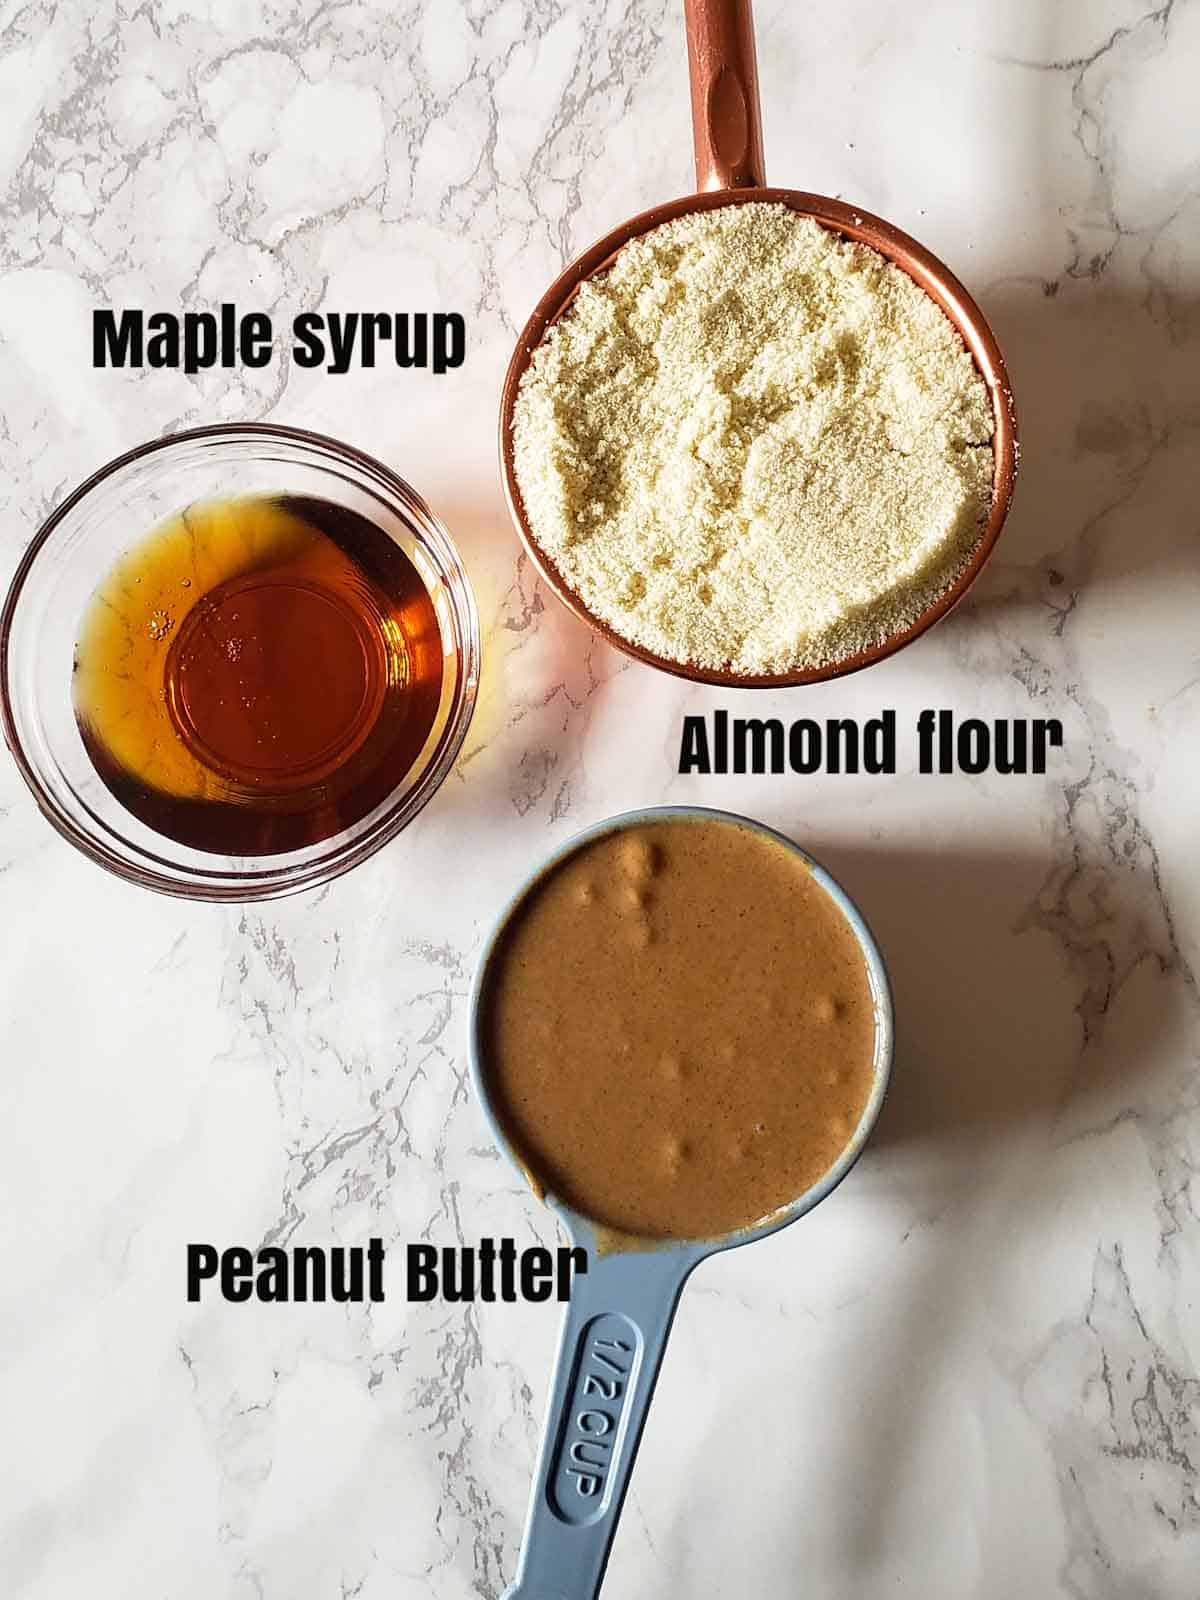 Only 3 ingredients are needed to make this cookie recipe.